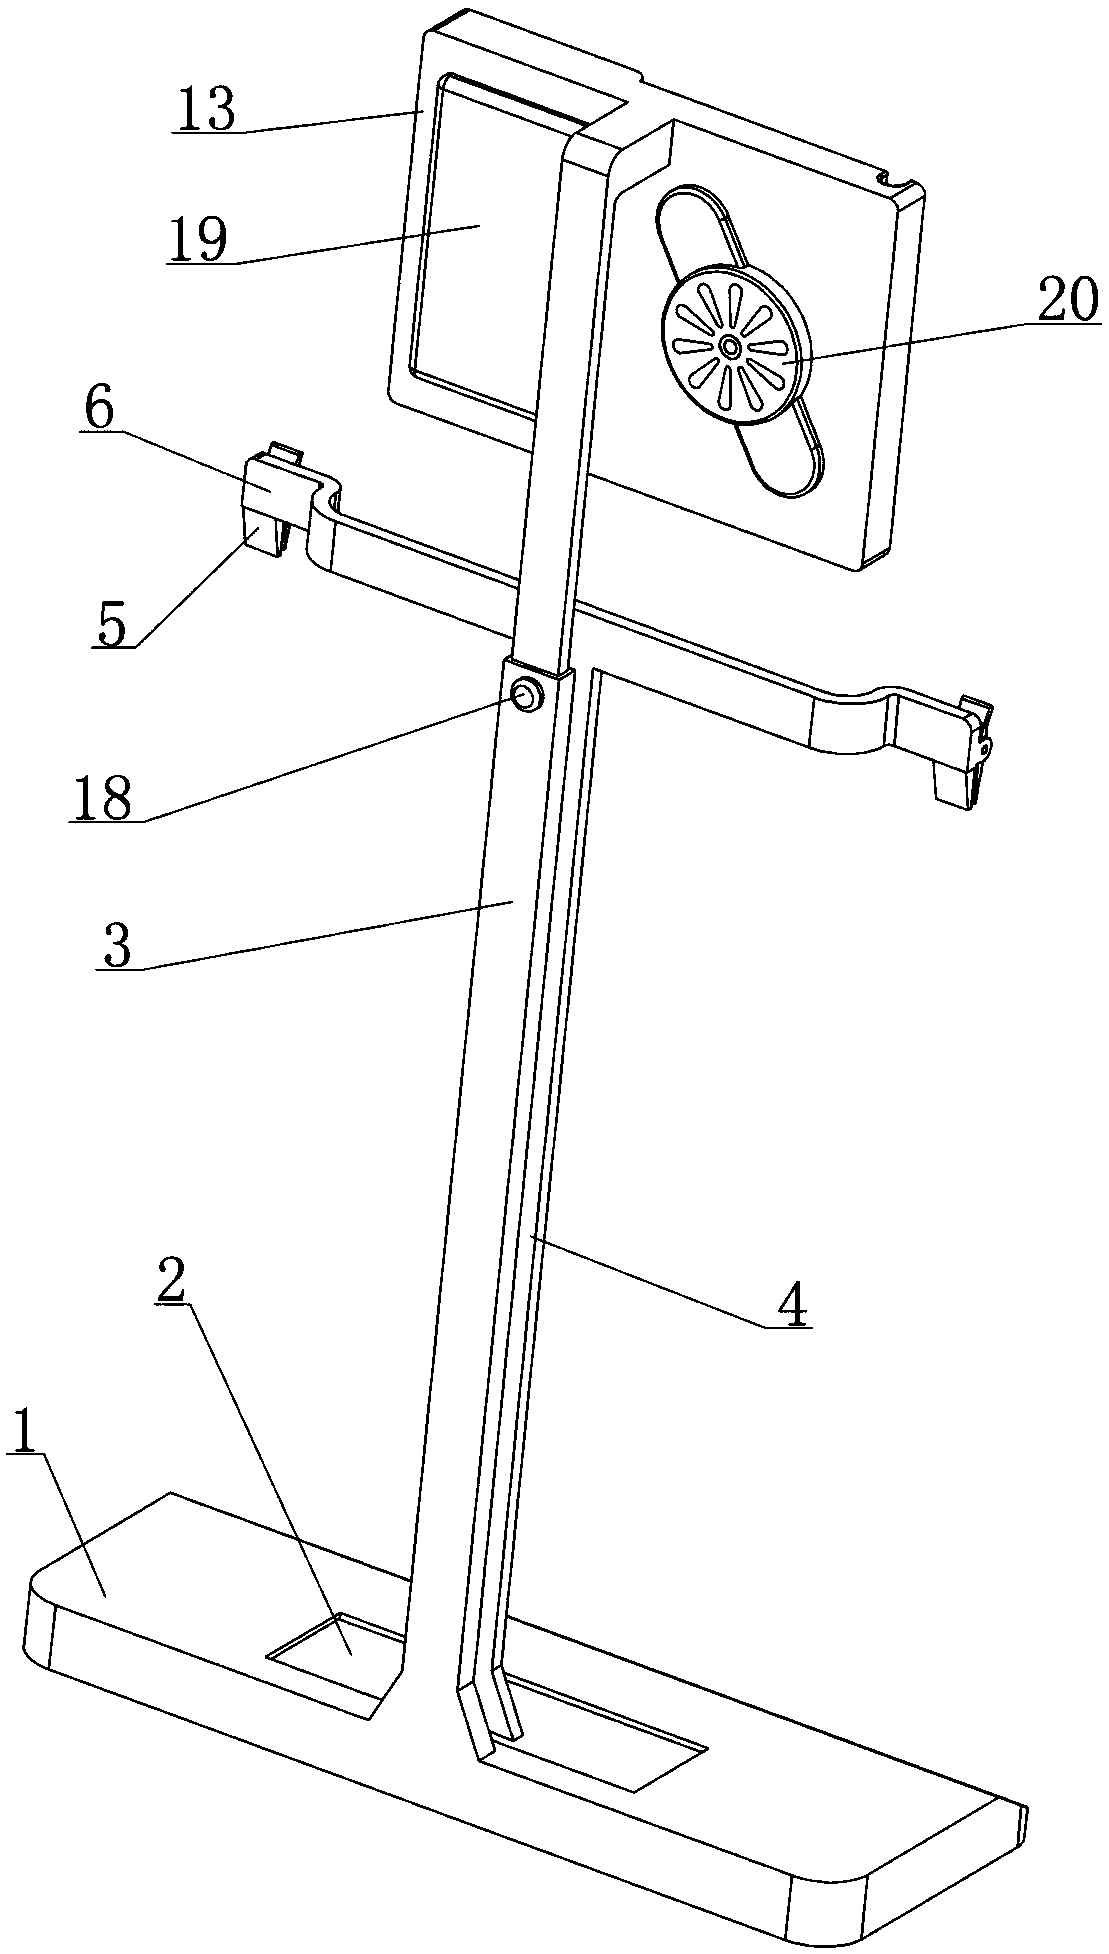 Multifunctional clinical drainage control device